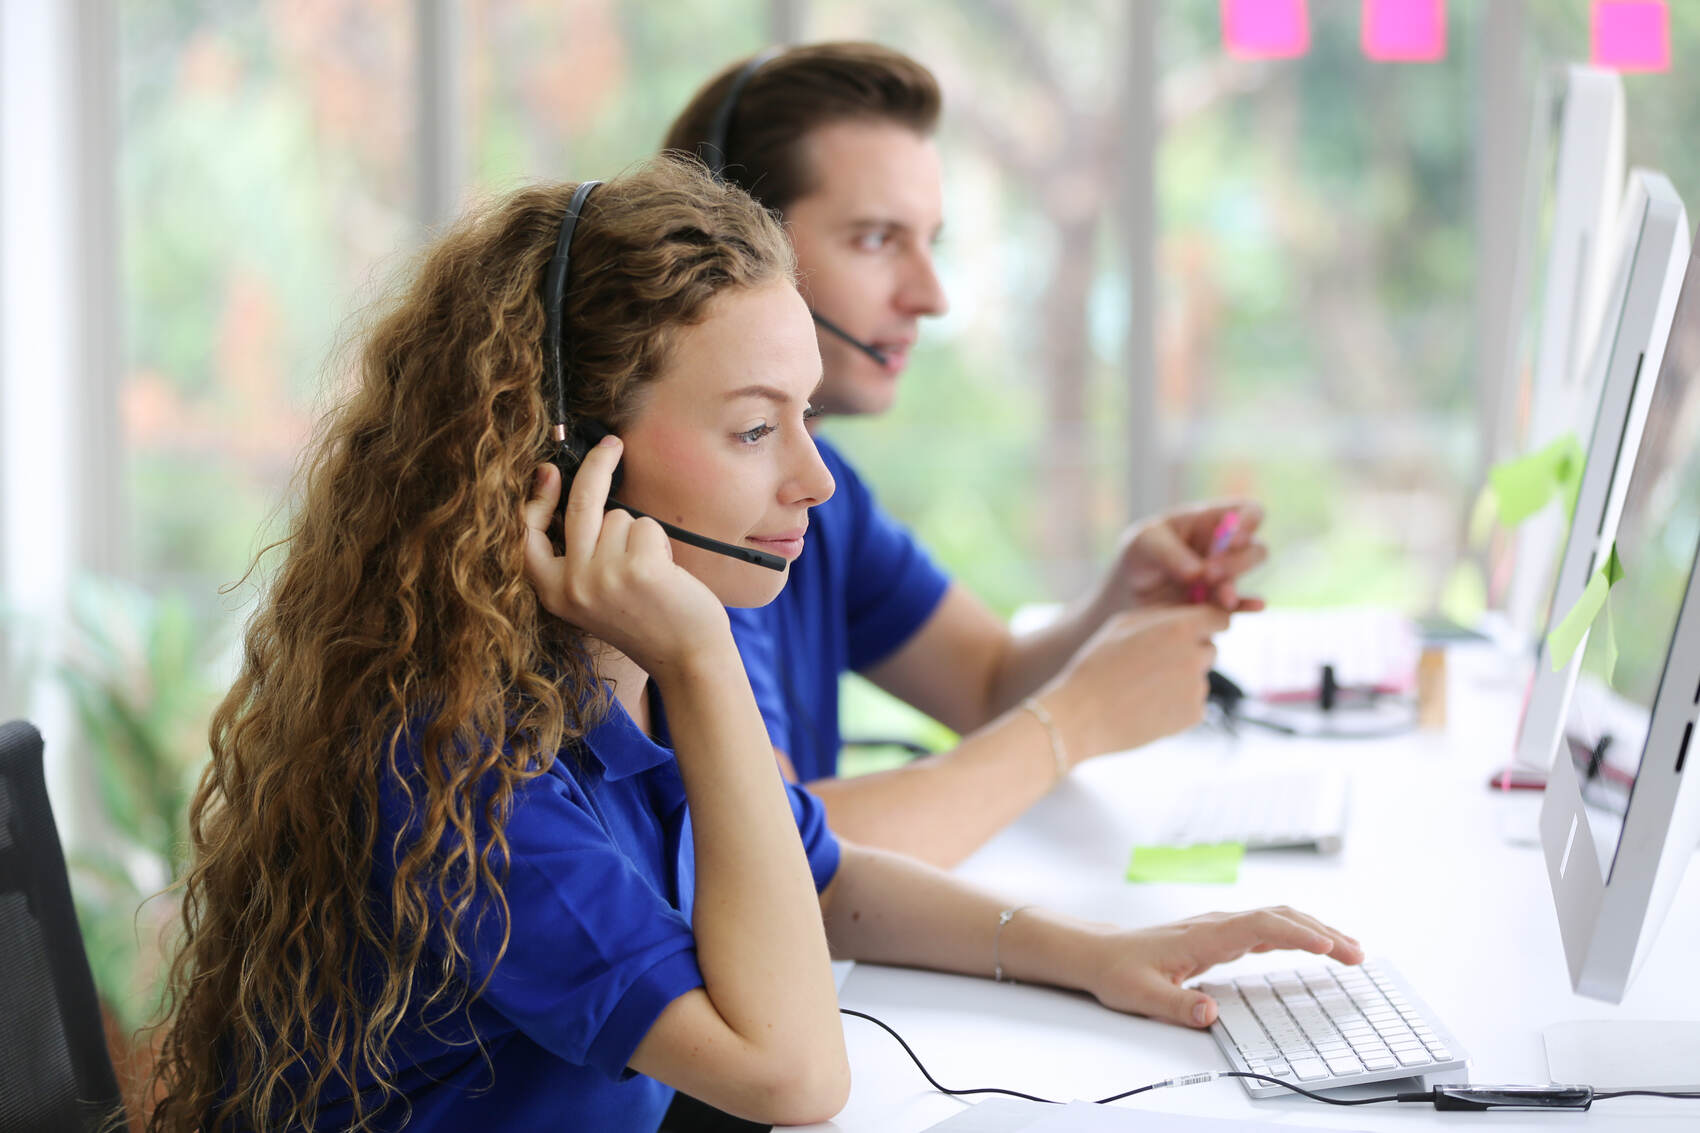 Tech Support Toronto | How Local Tech Support Can Benefit Your Business